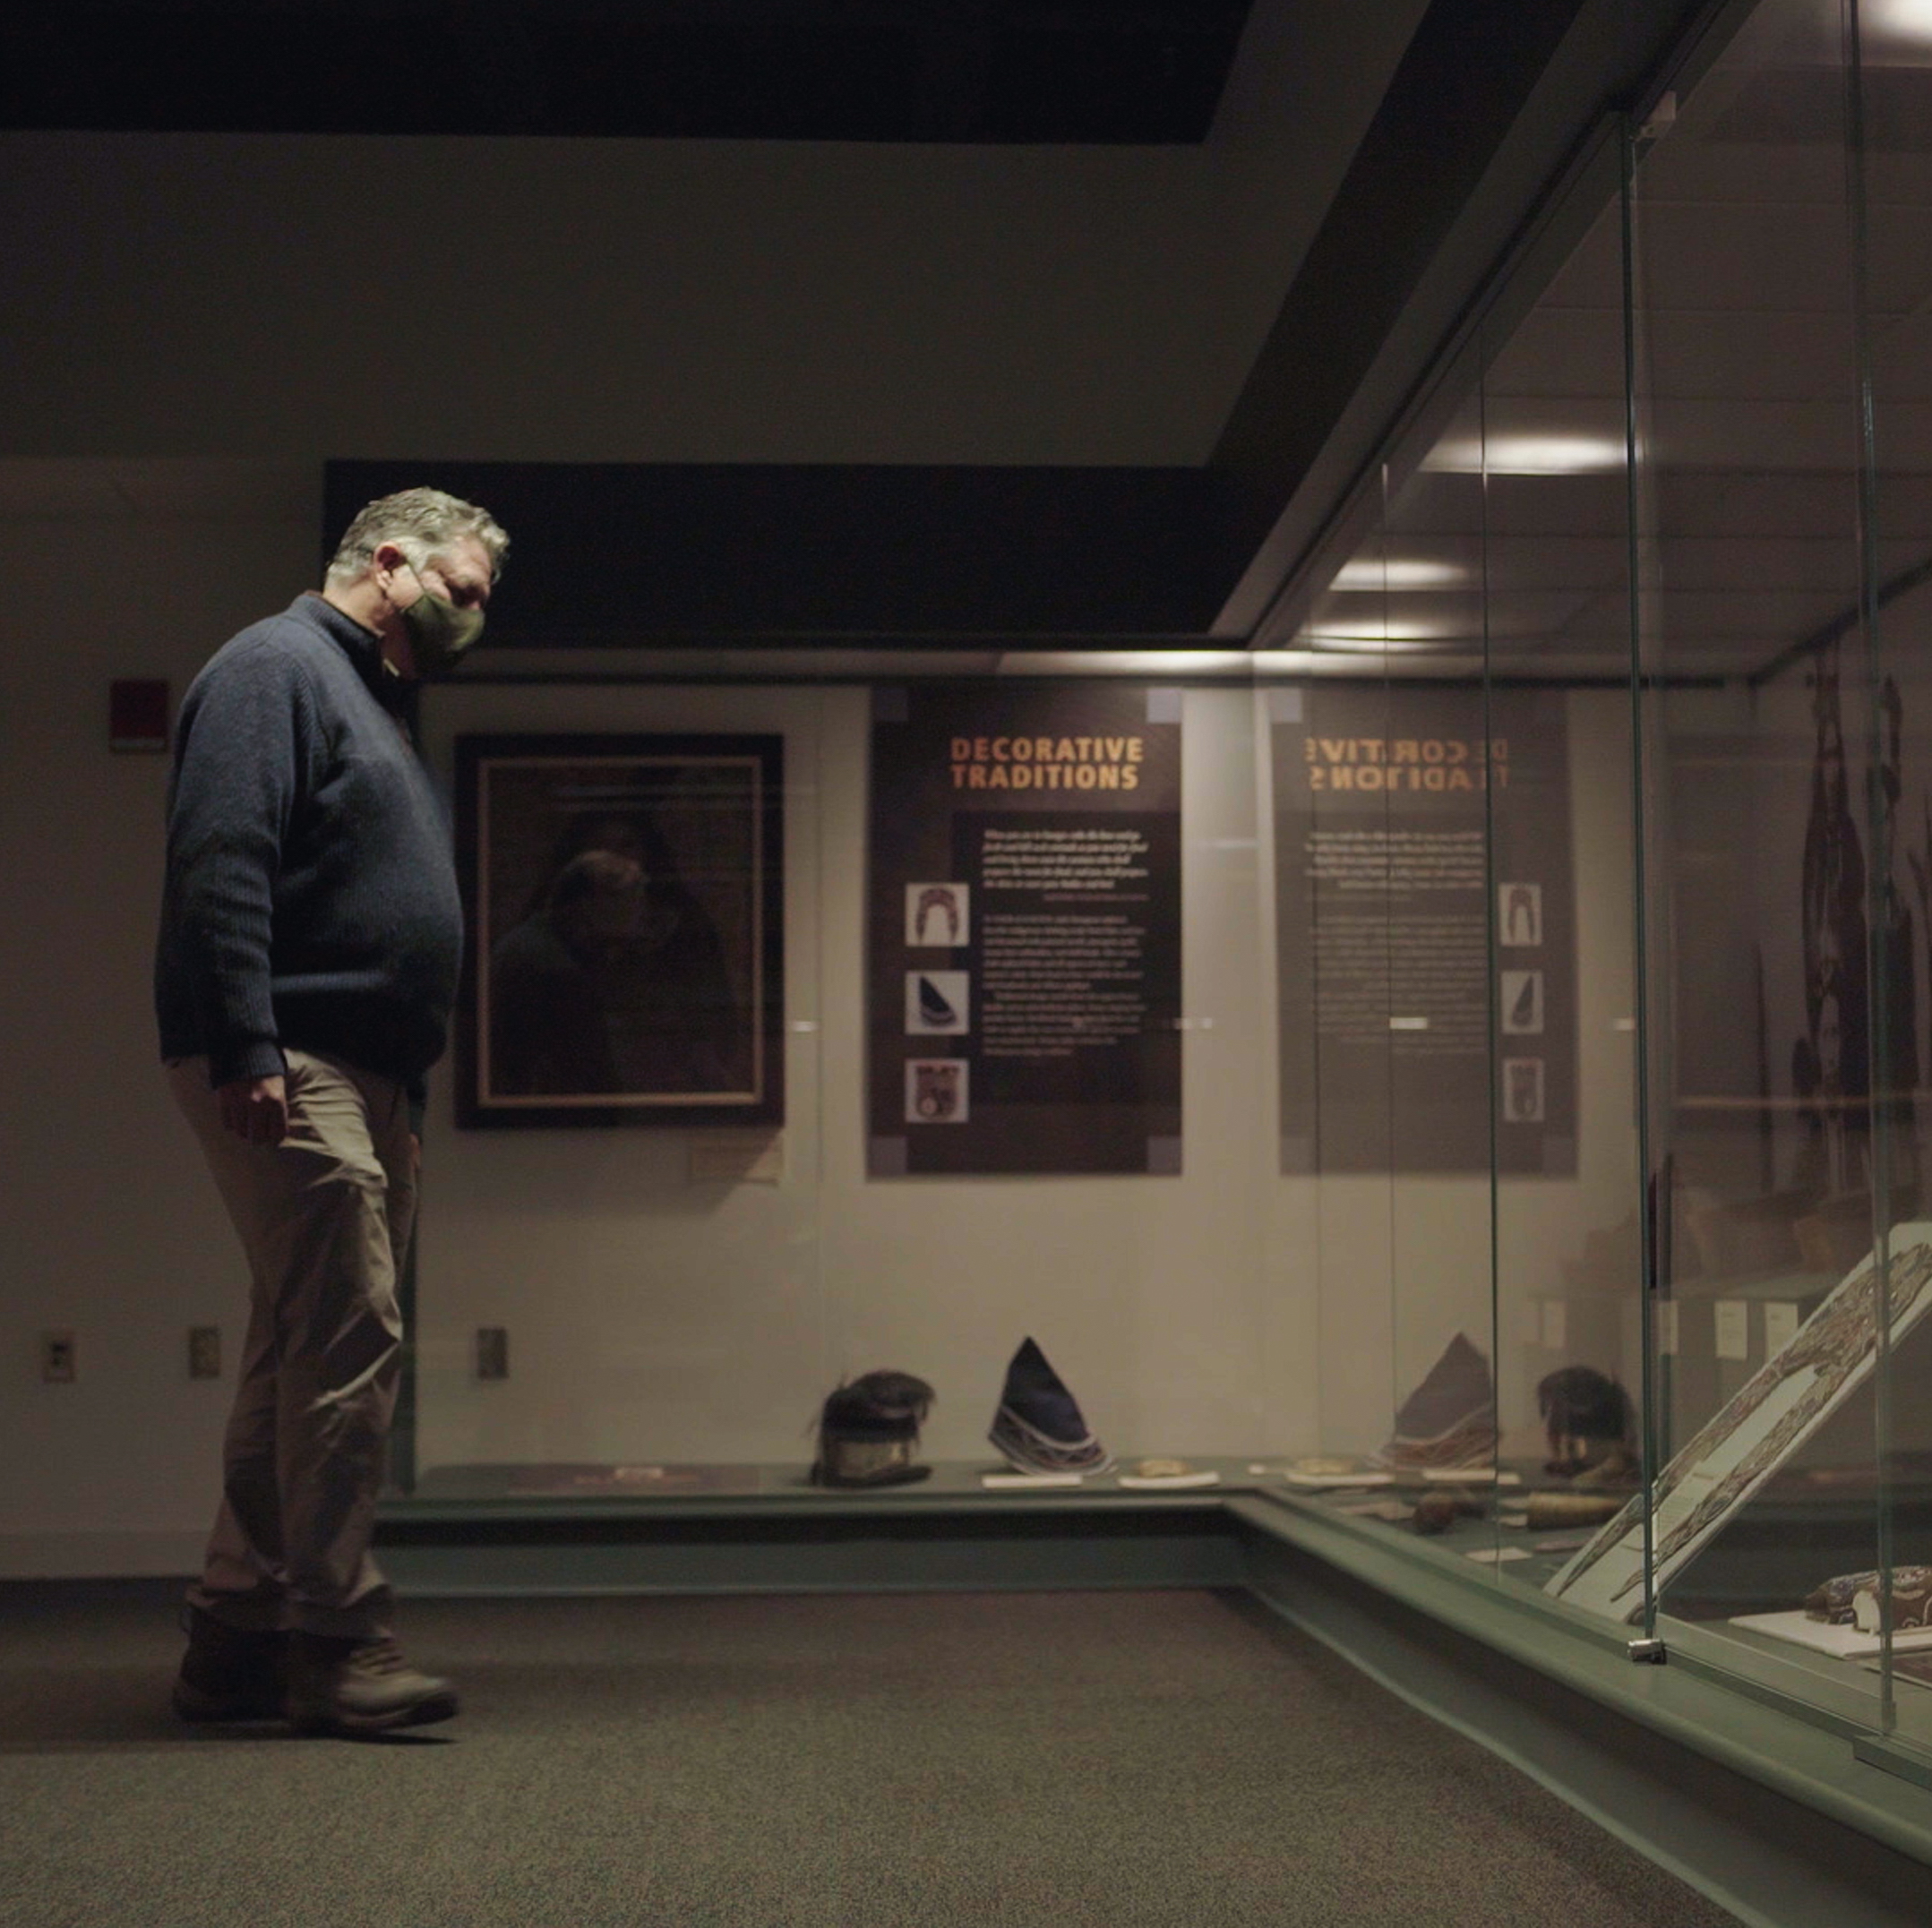 Photograph of James Eric Francis Senior standing in a darkened museum, looking at Penobscot clothing items displayed in glass cases.